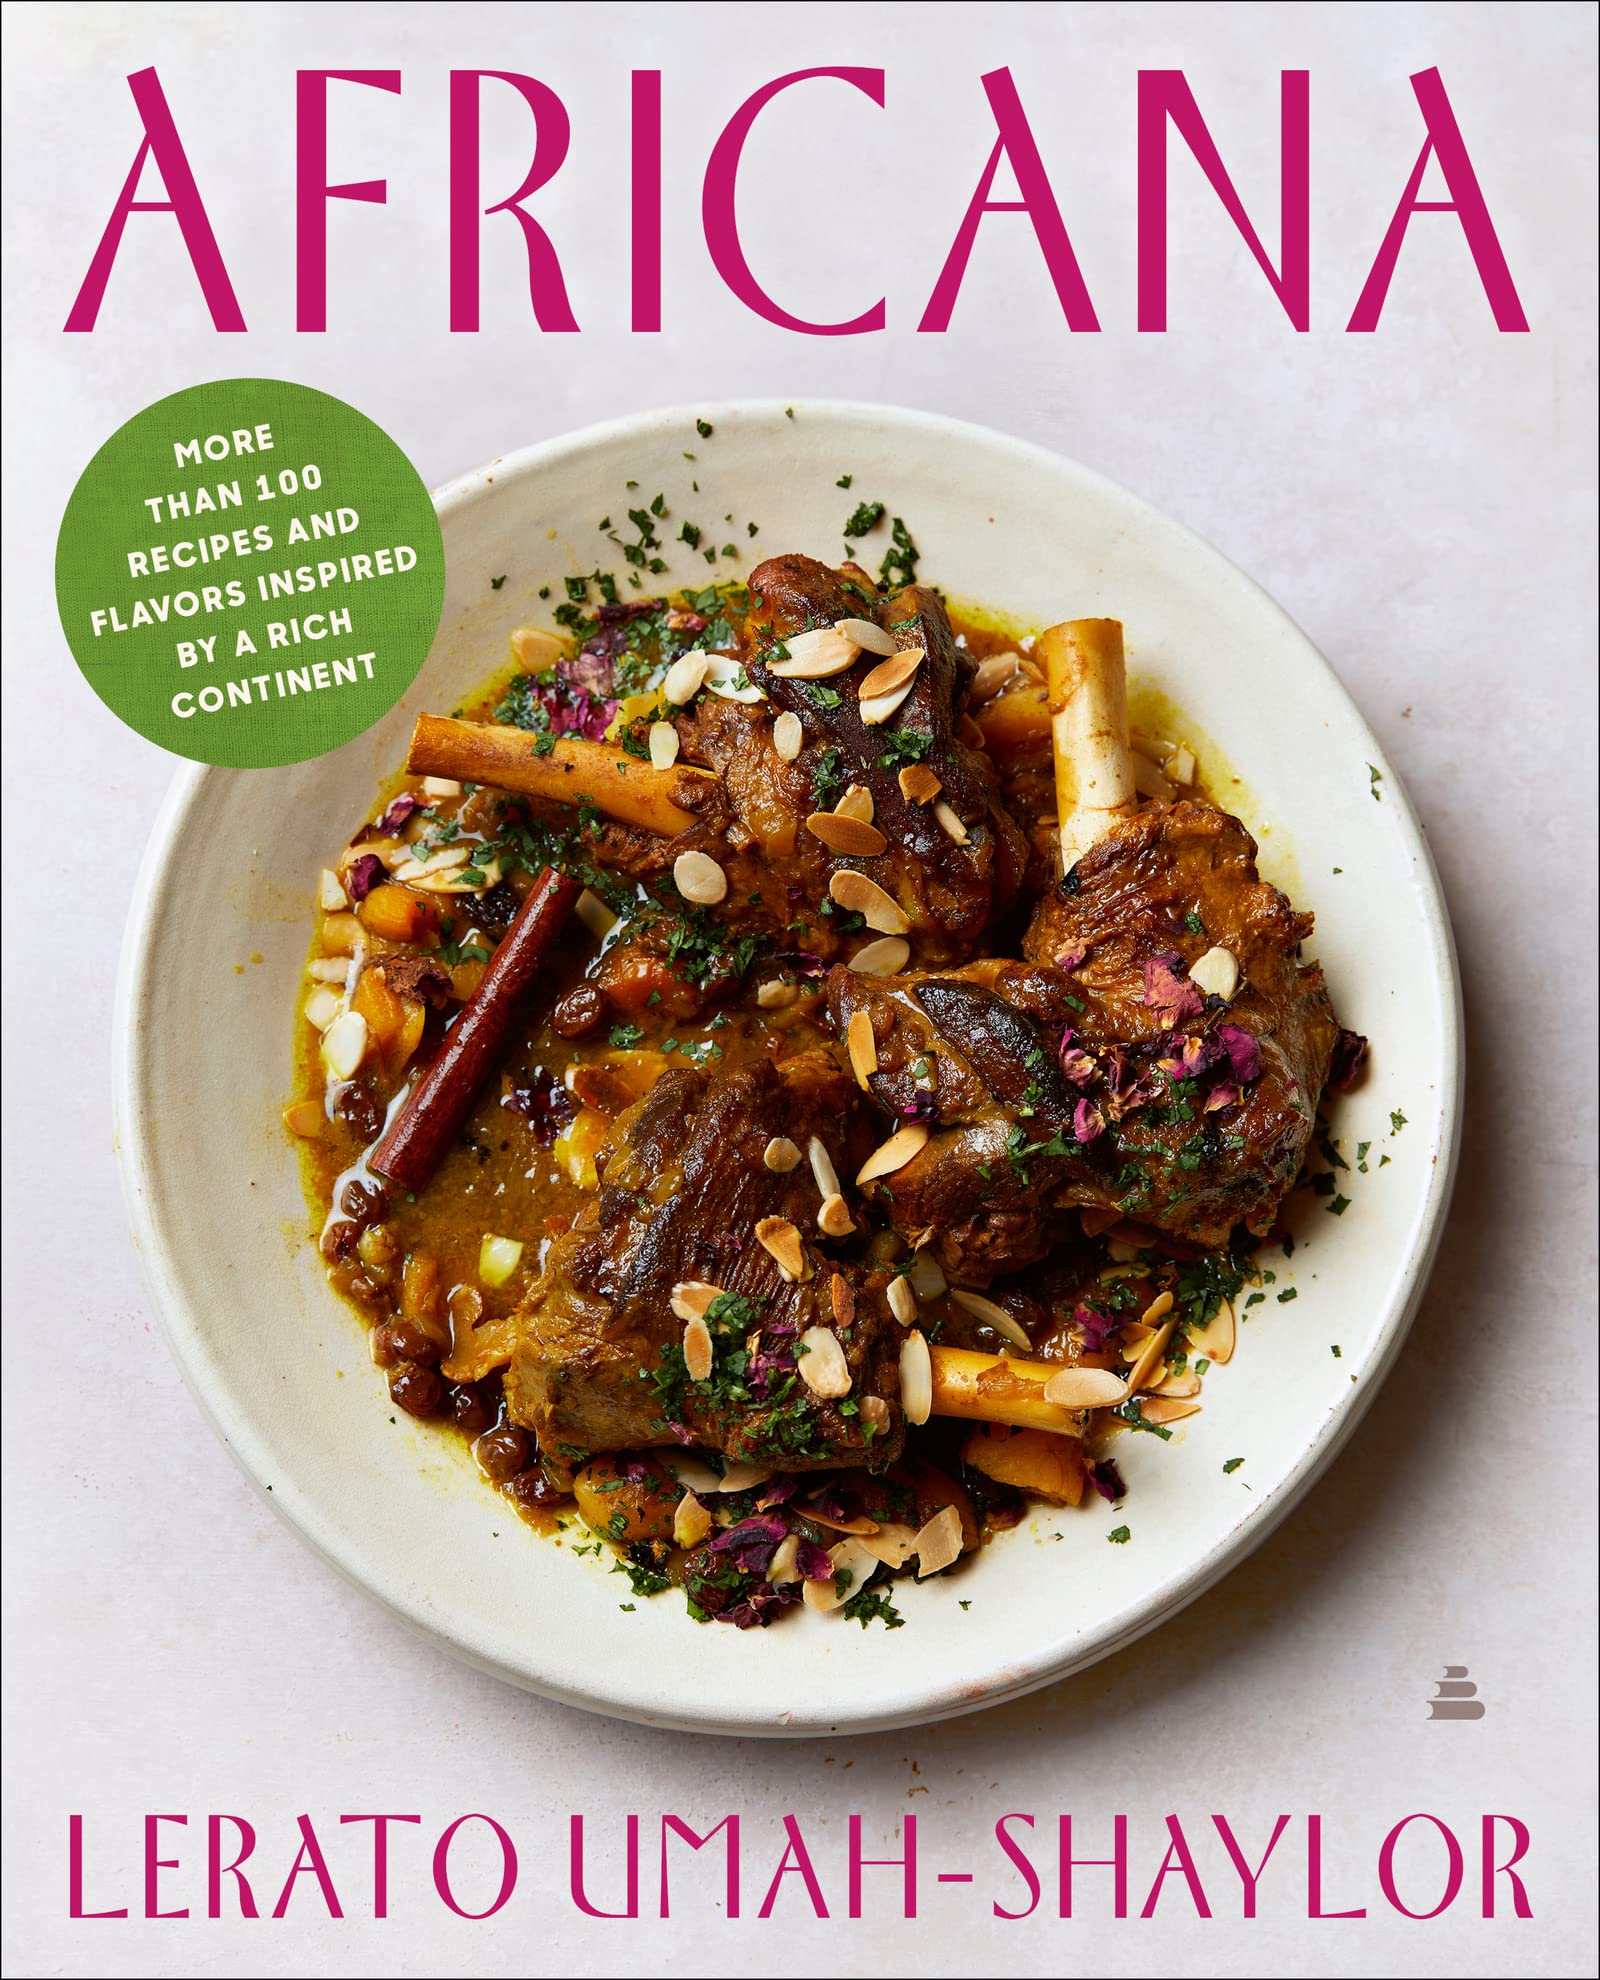 Africana: More than 100 Recipes and Flavors Inspired by a Rich Continent (Lerato Umah-Shaylor)